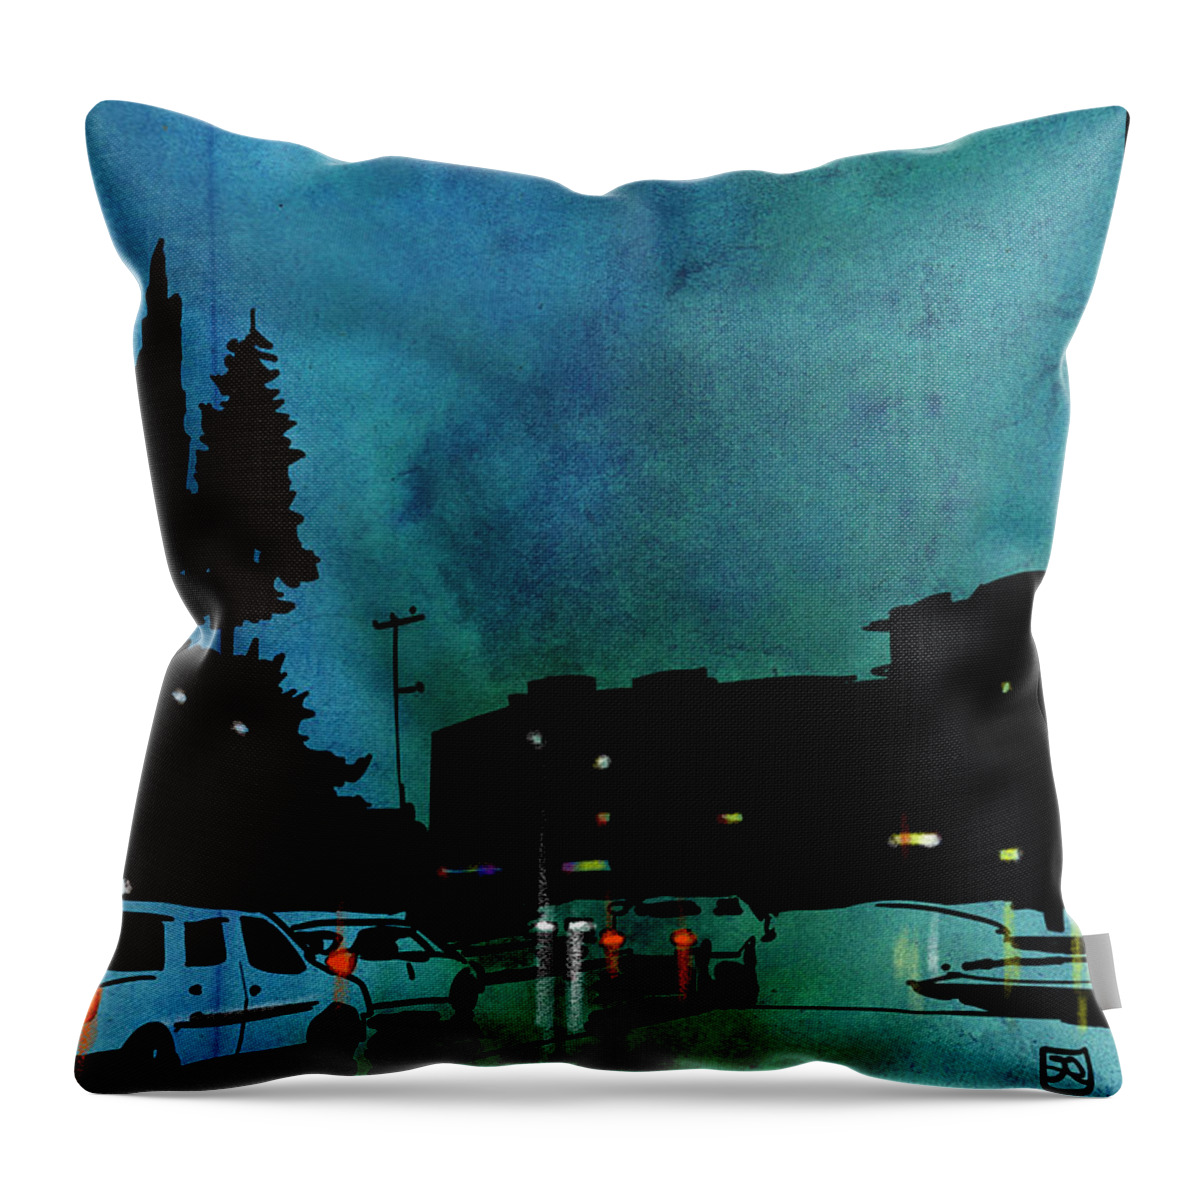 Nightscape Throw Pillow featuring the drawing Nightscape 03 by Giuseppe Cristiano